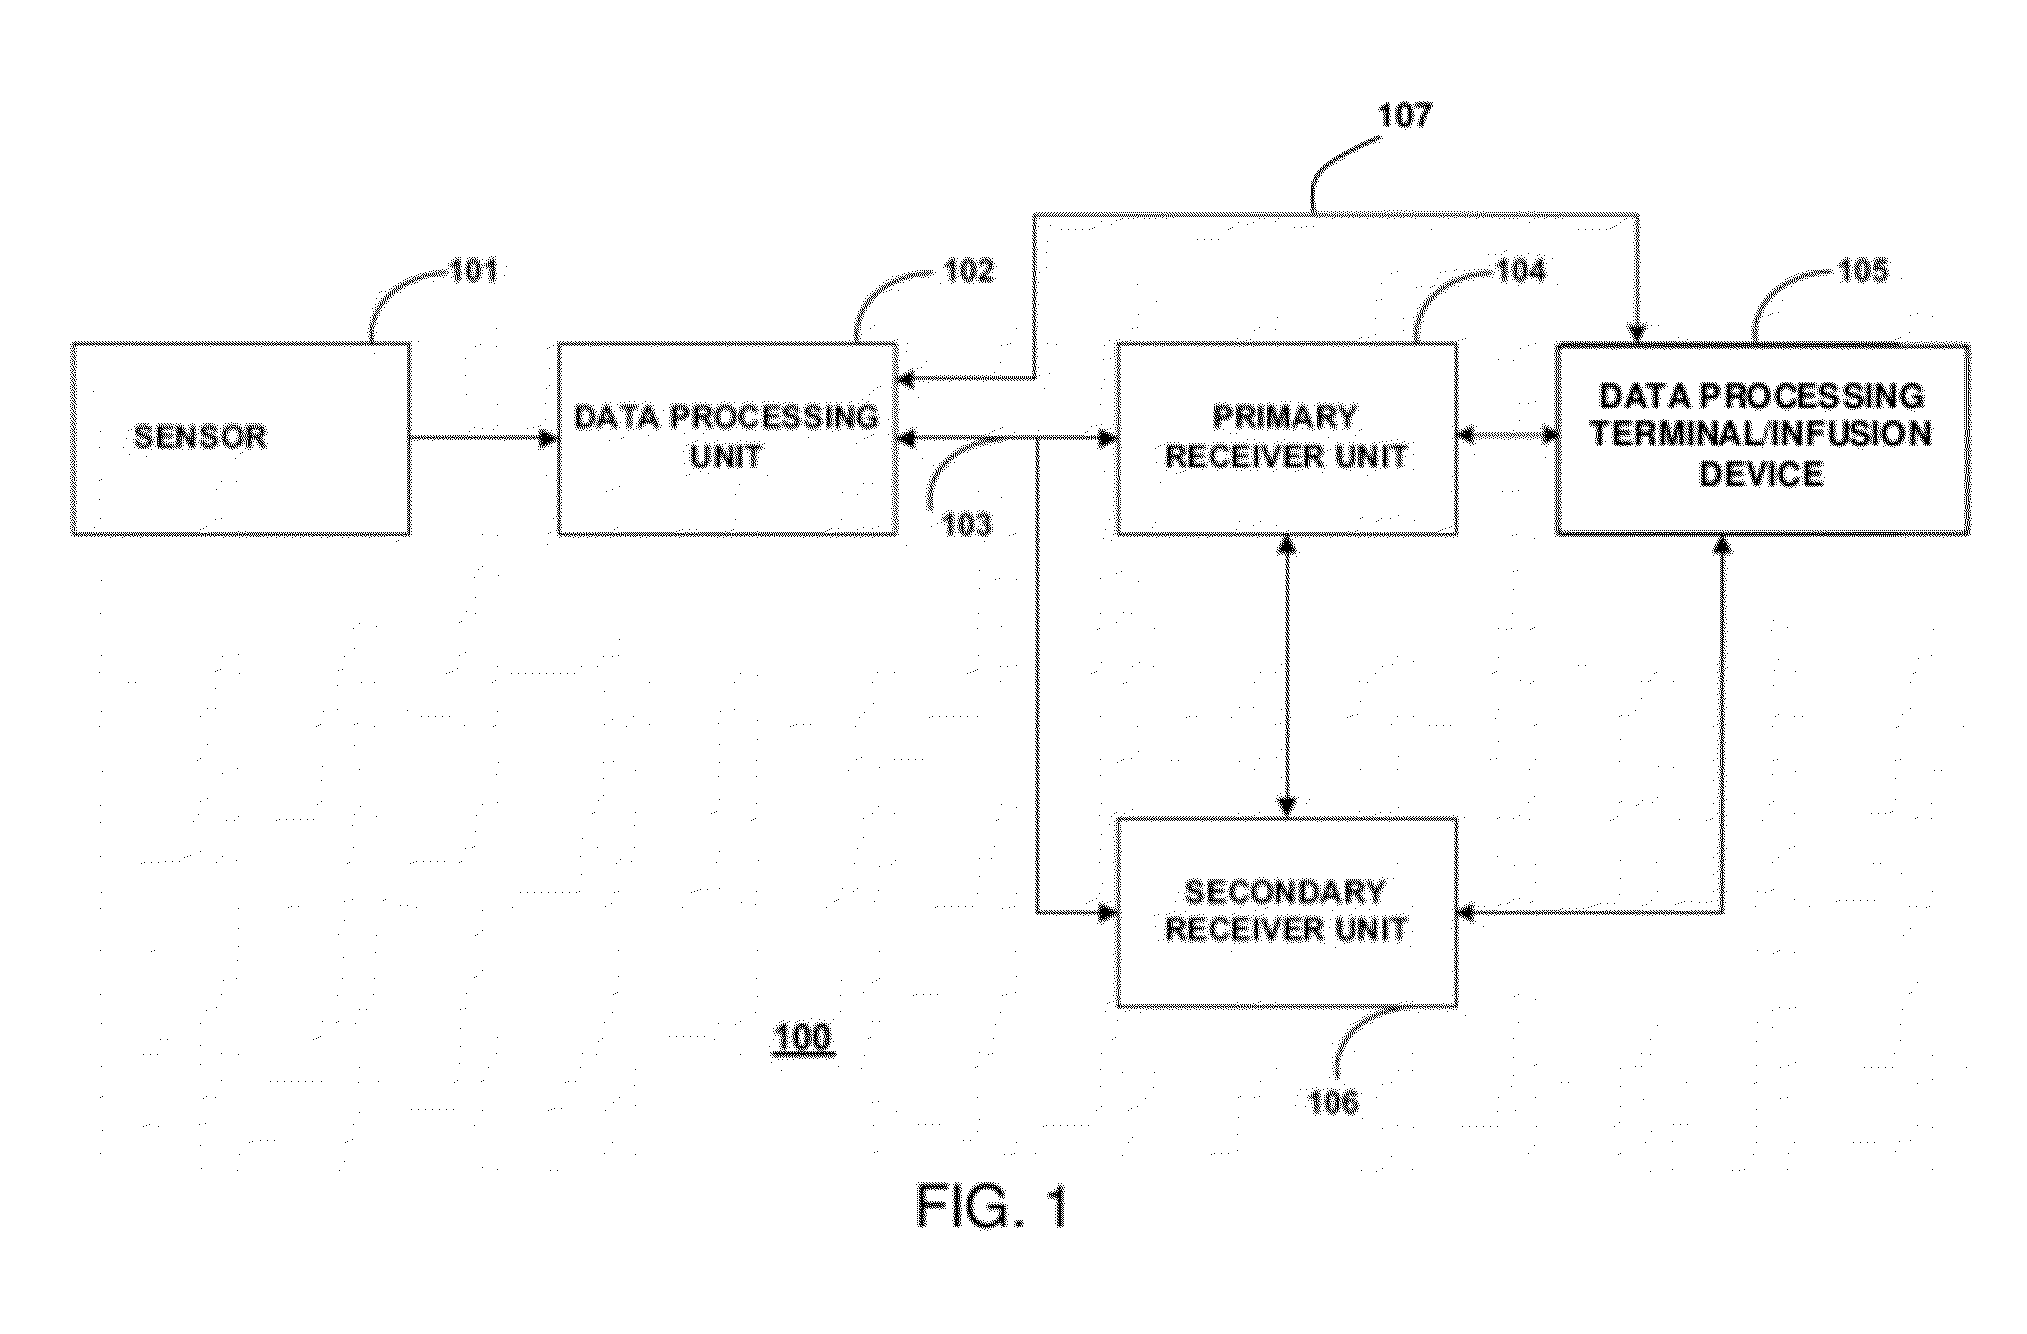 Analyte Sensors Comprising Thickeners, Enzyme Stabilizers and Osmium Boronates